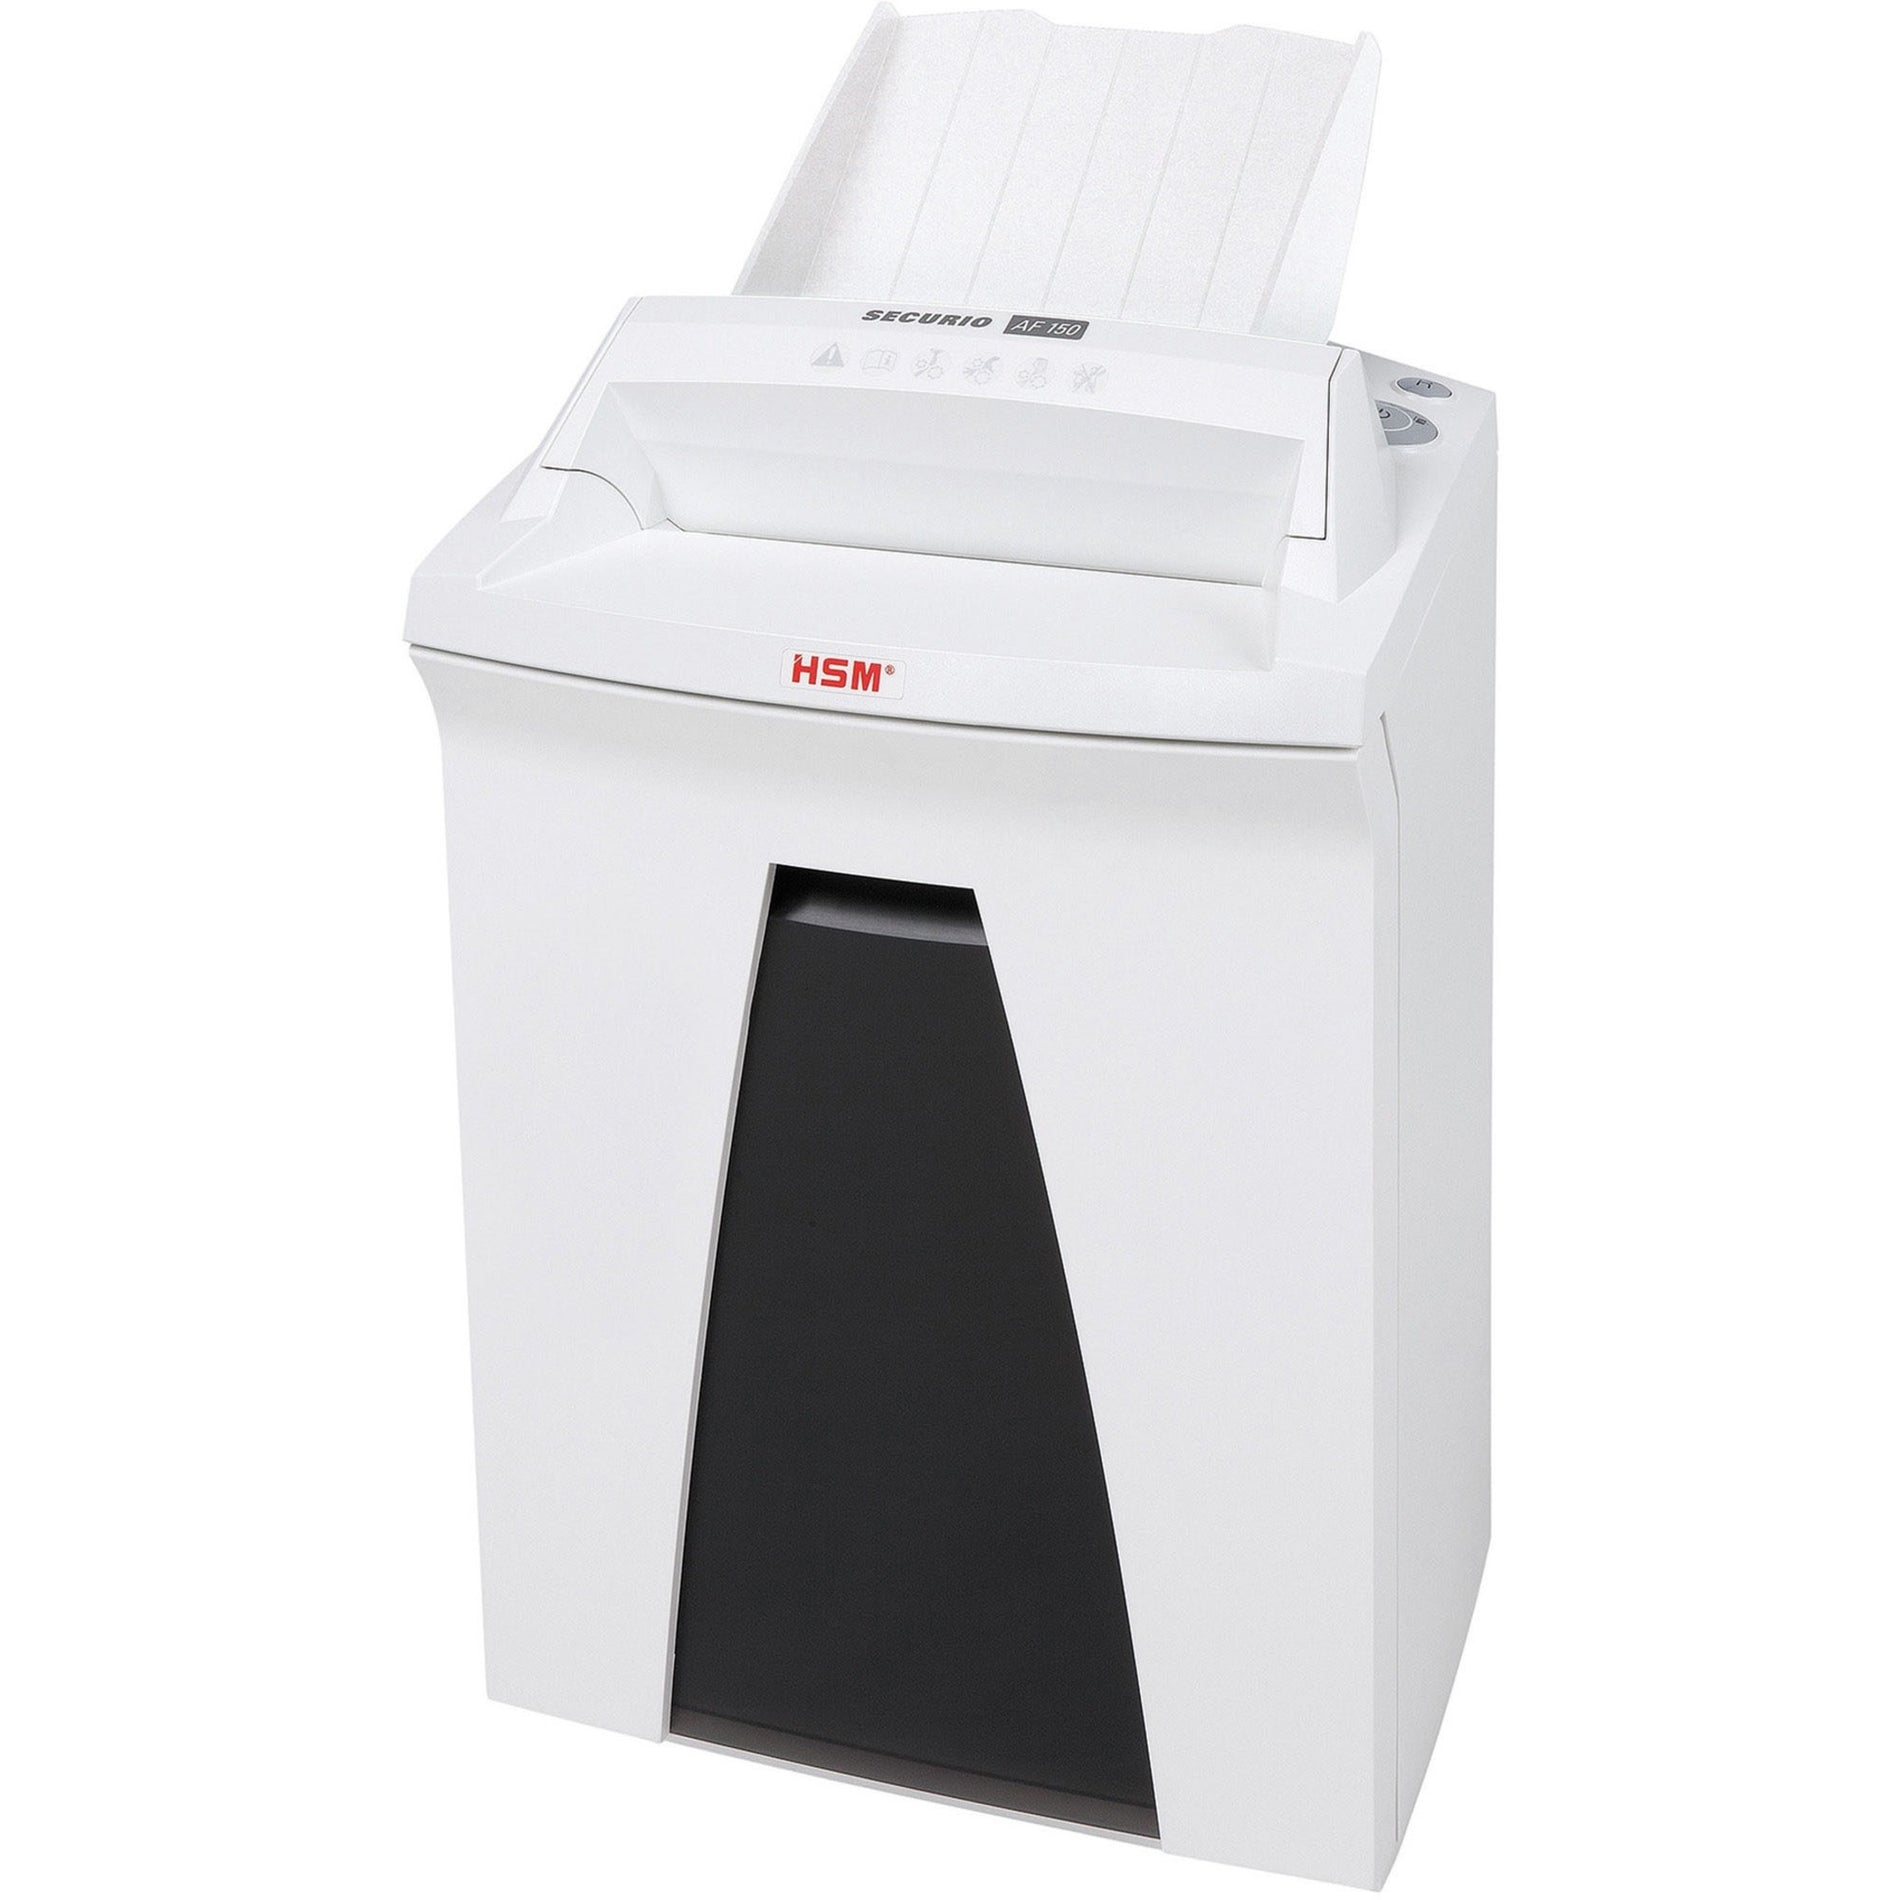 HSM 2082 SECURIO AF150 Micro-Cut Shredder with Automatic Paper Feed, Office Paper Shredder, Anti Jamming, Energy Management Control System, Quiet Operation